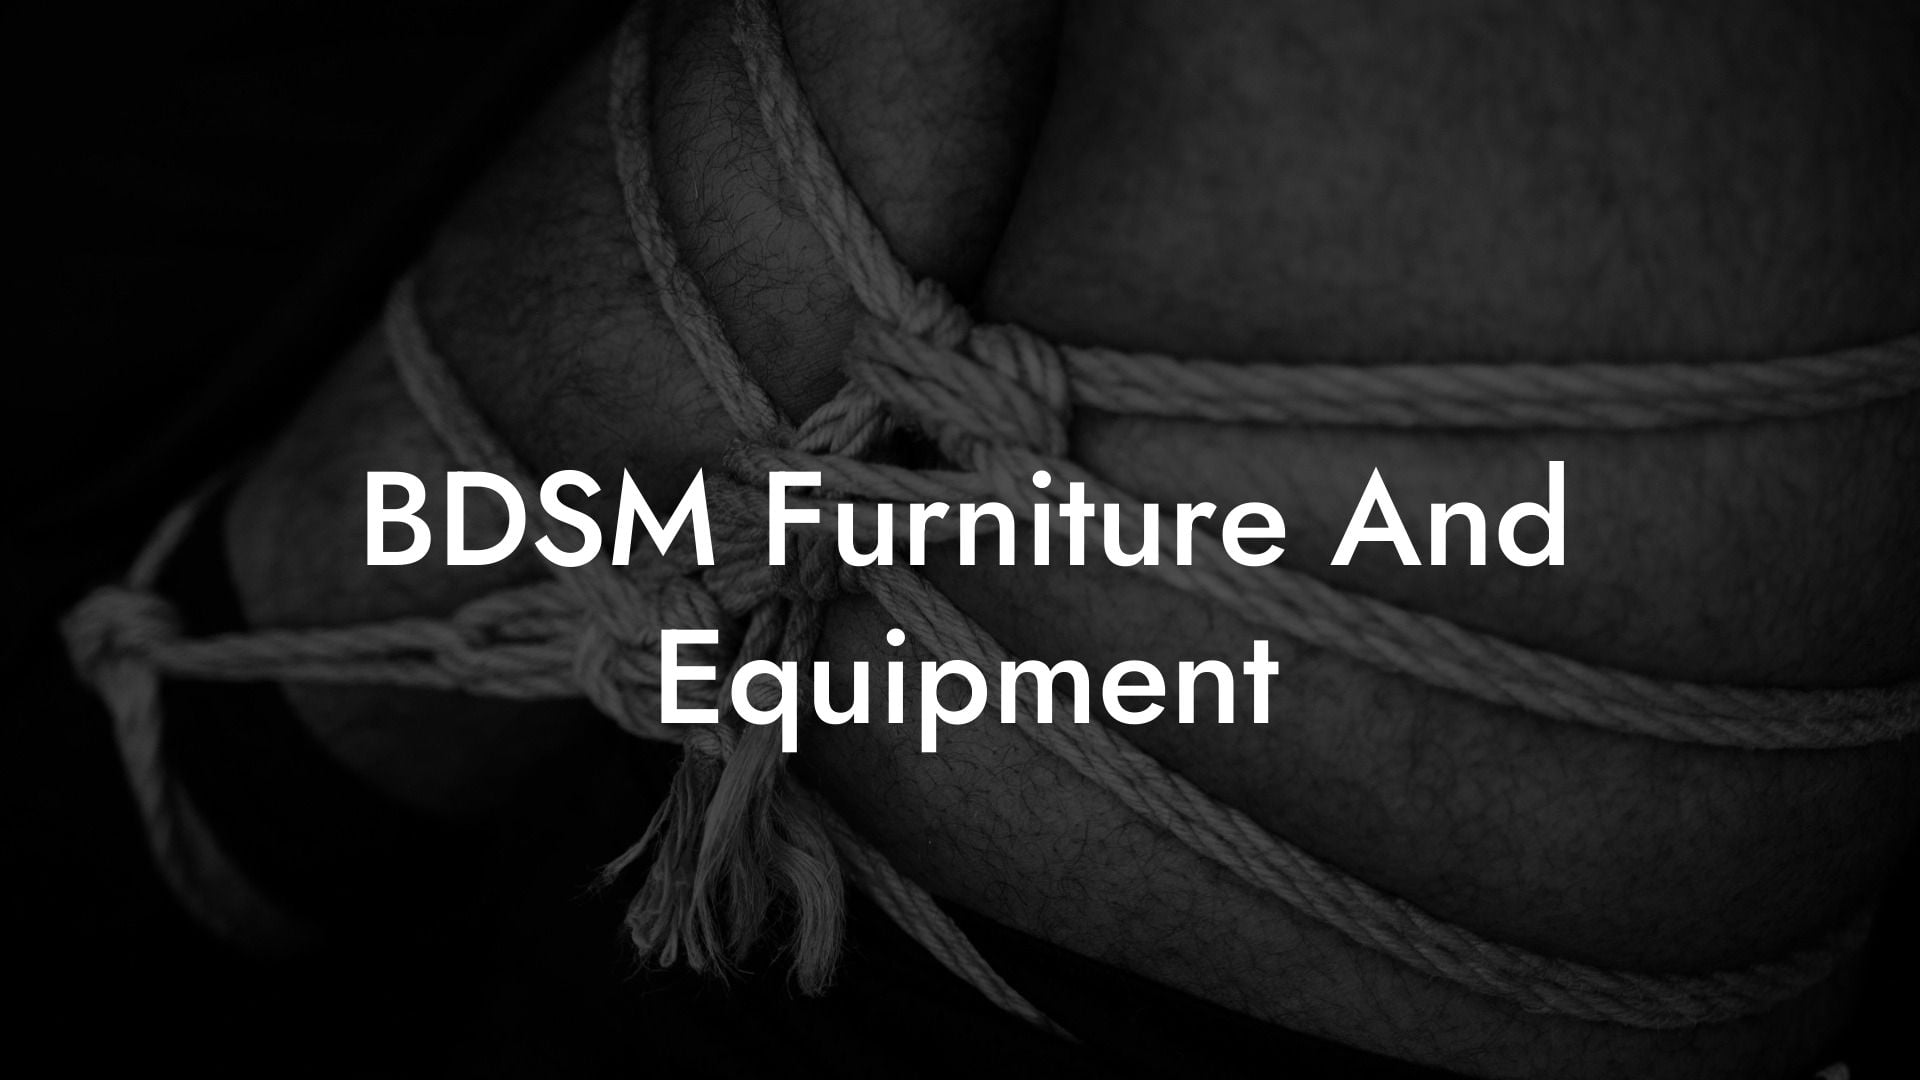 BDSM Furniture And Equipment